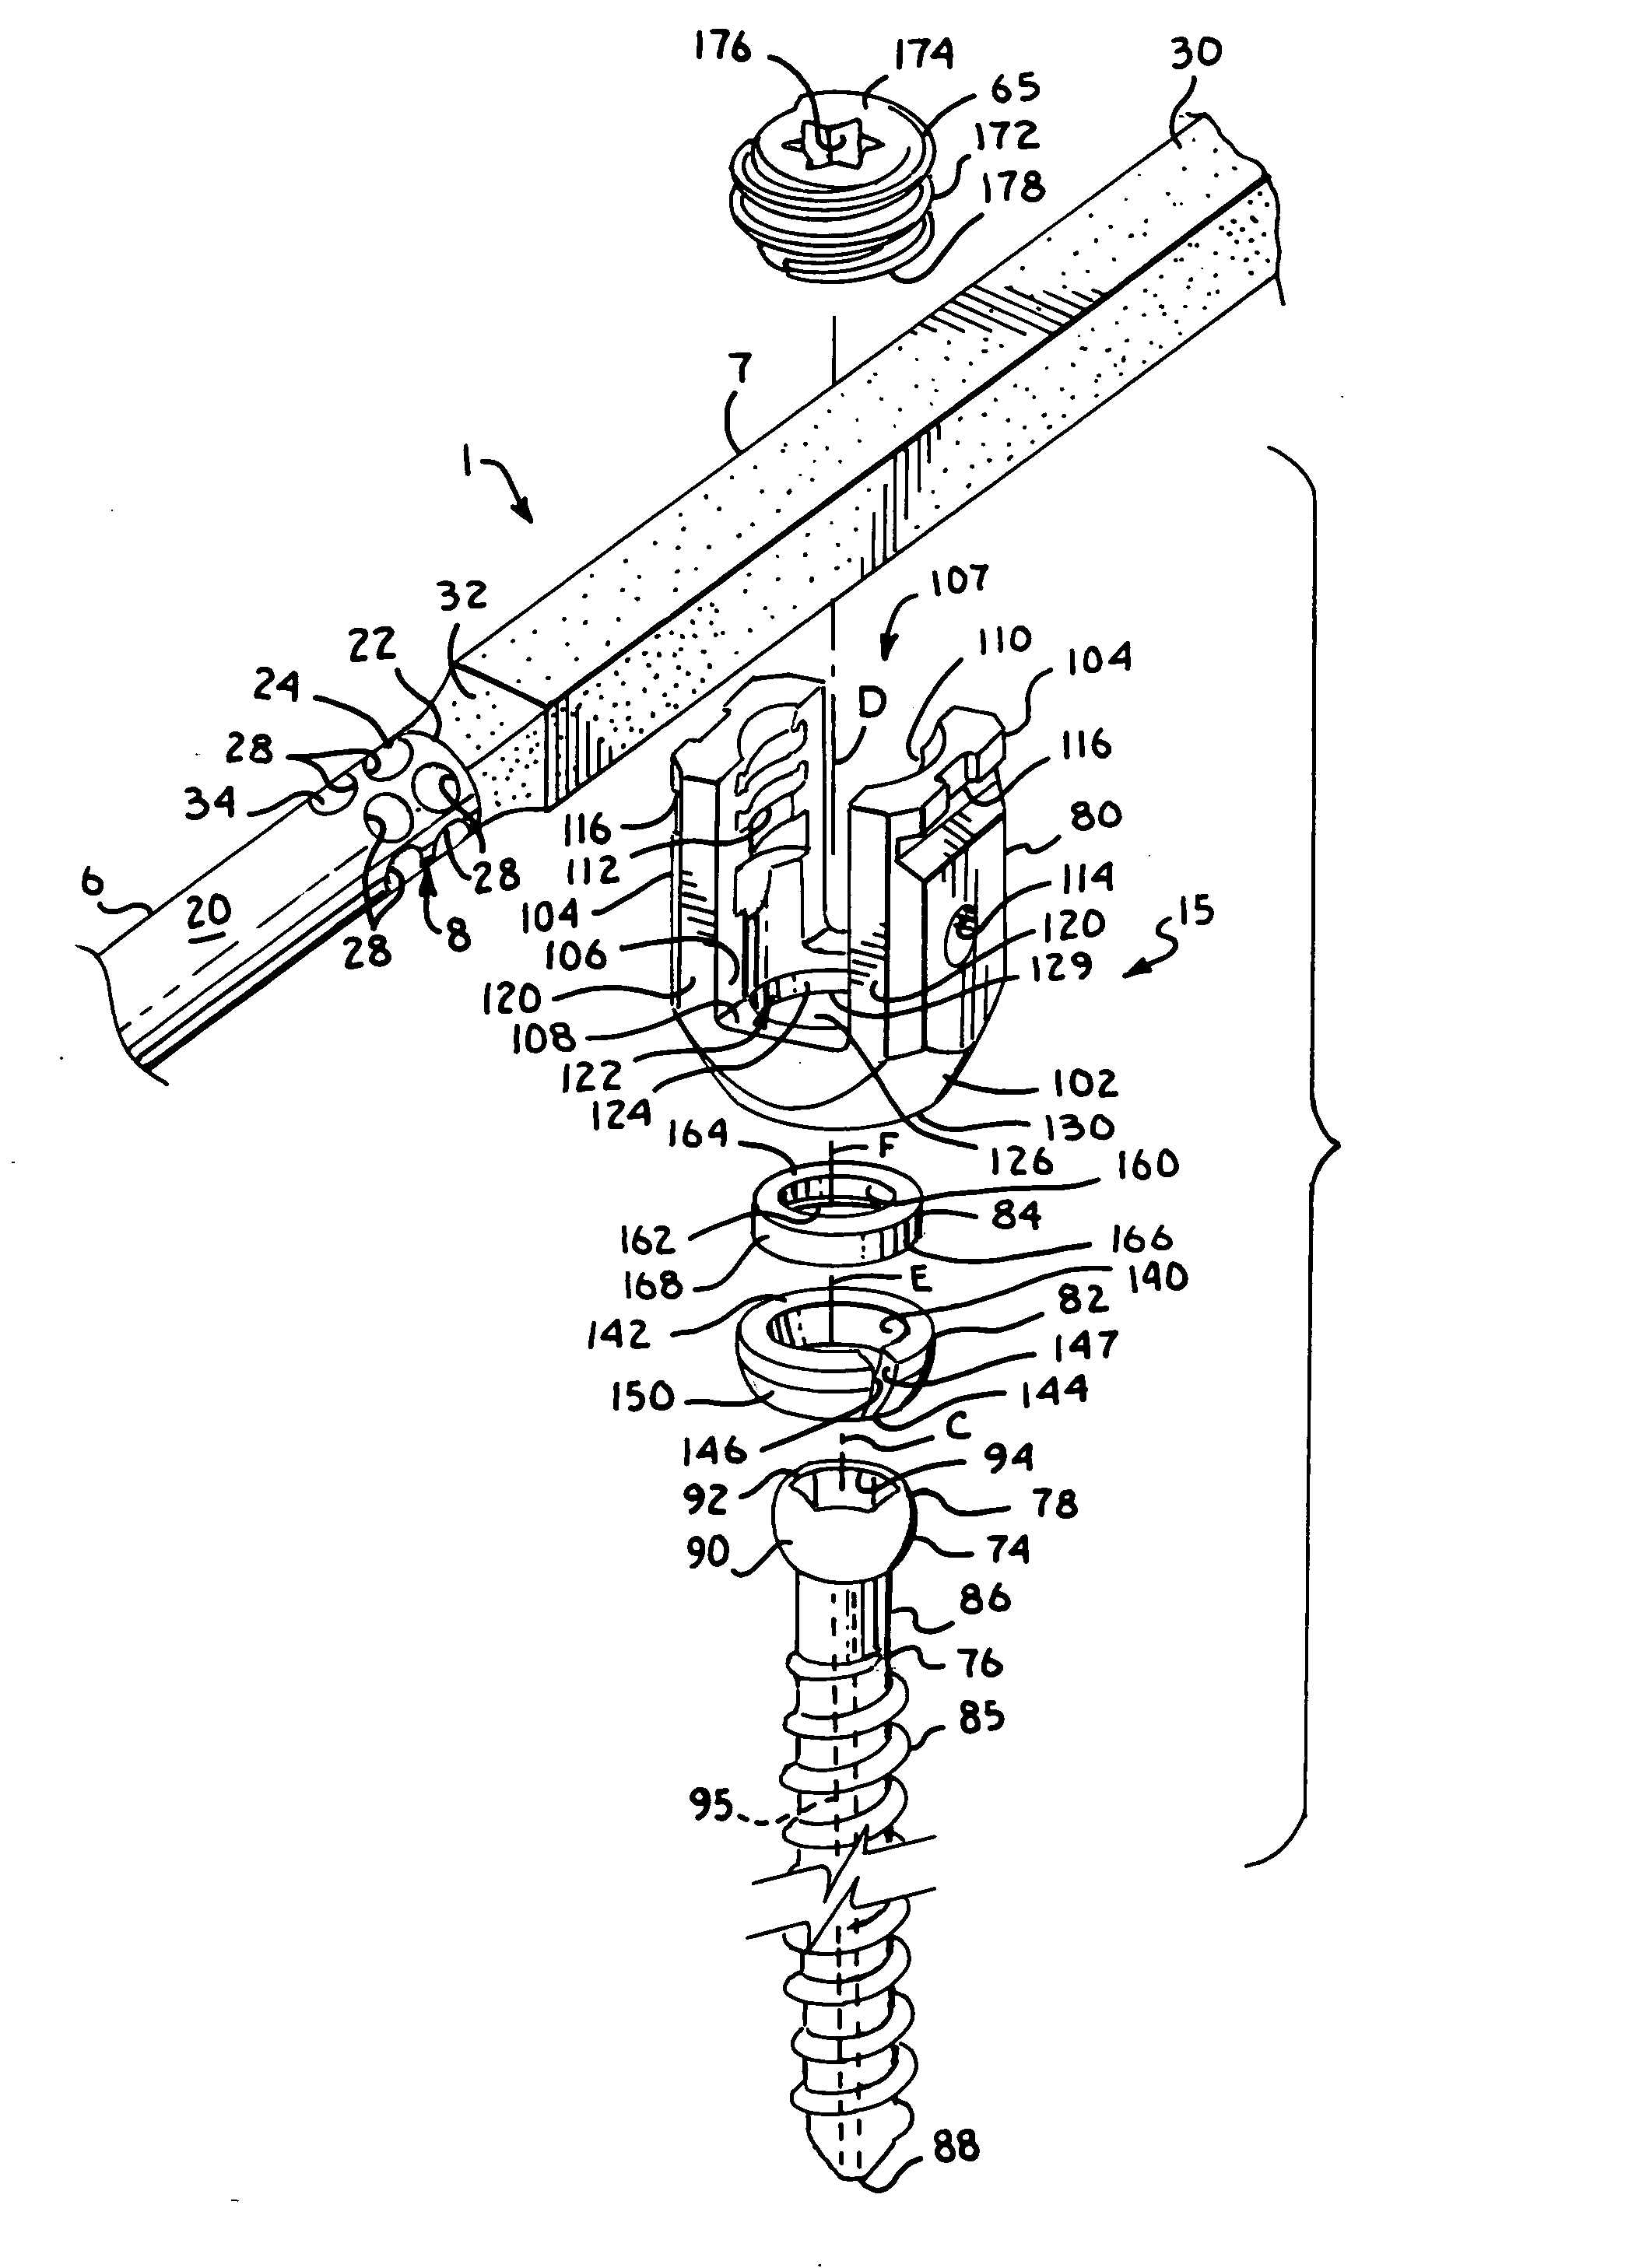 Dynamic stabilization member with molded connection